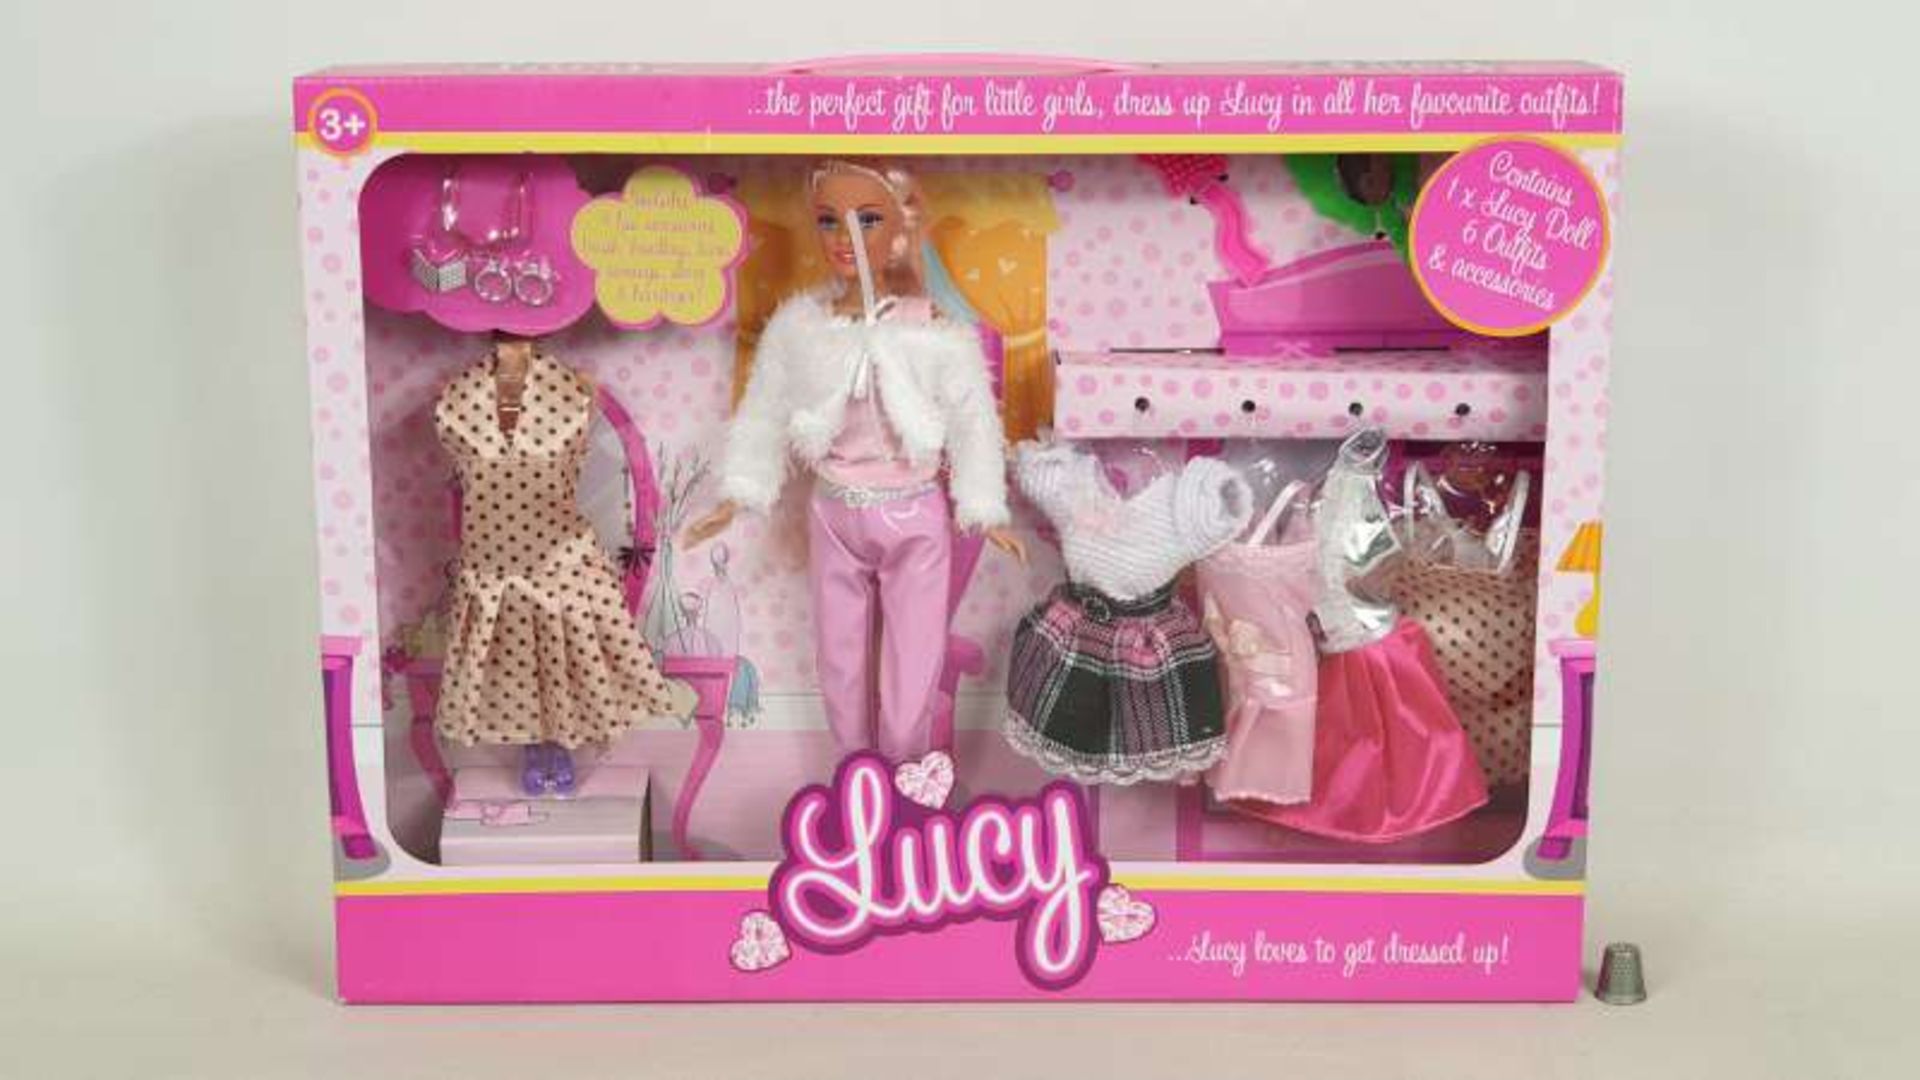 20 X BRAND NEW BOXED LUCY DOLLS FASHION GIRL BUMPER PACKS IN 4 BOXES